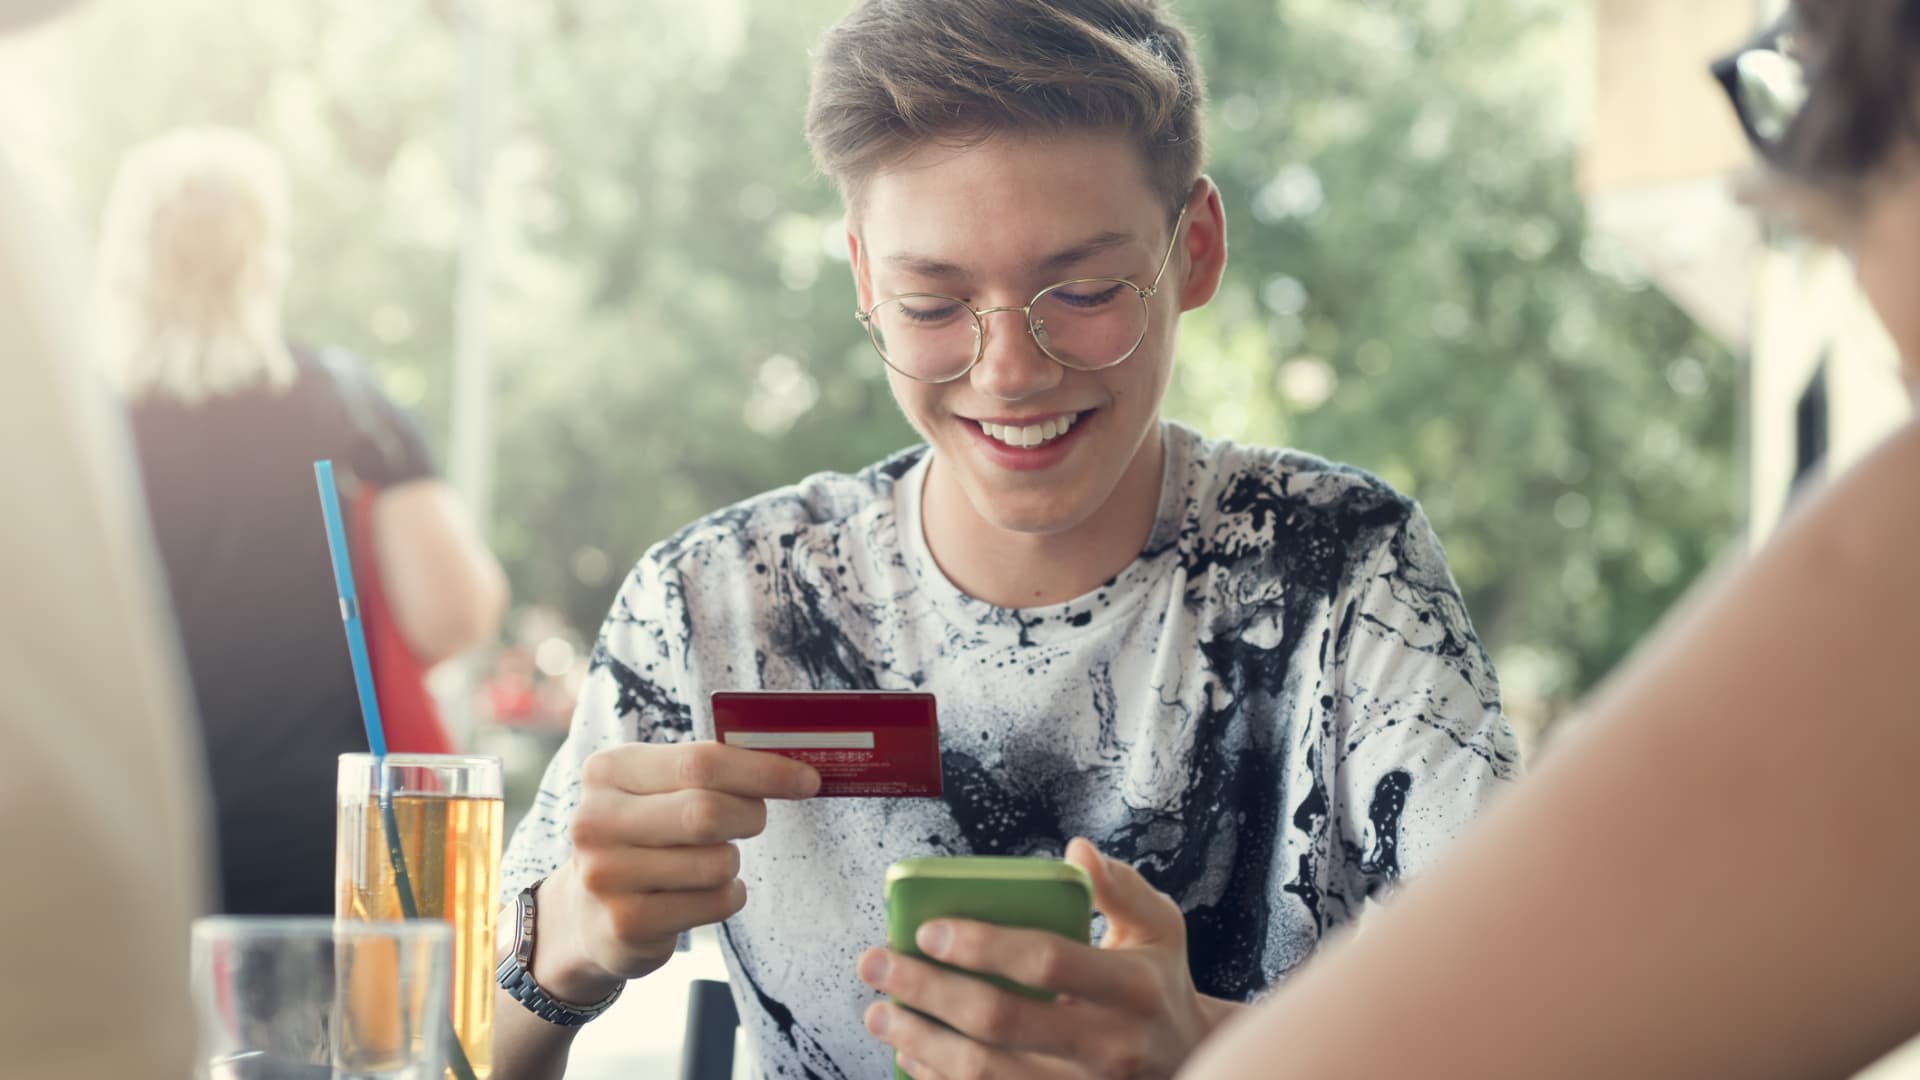 Step Review: All-in-One Mobile Bank Service for Teenagers